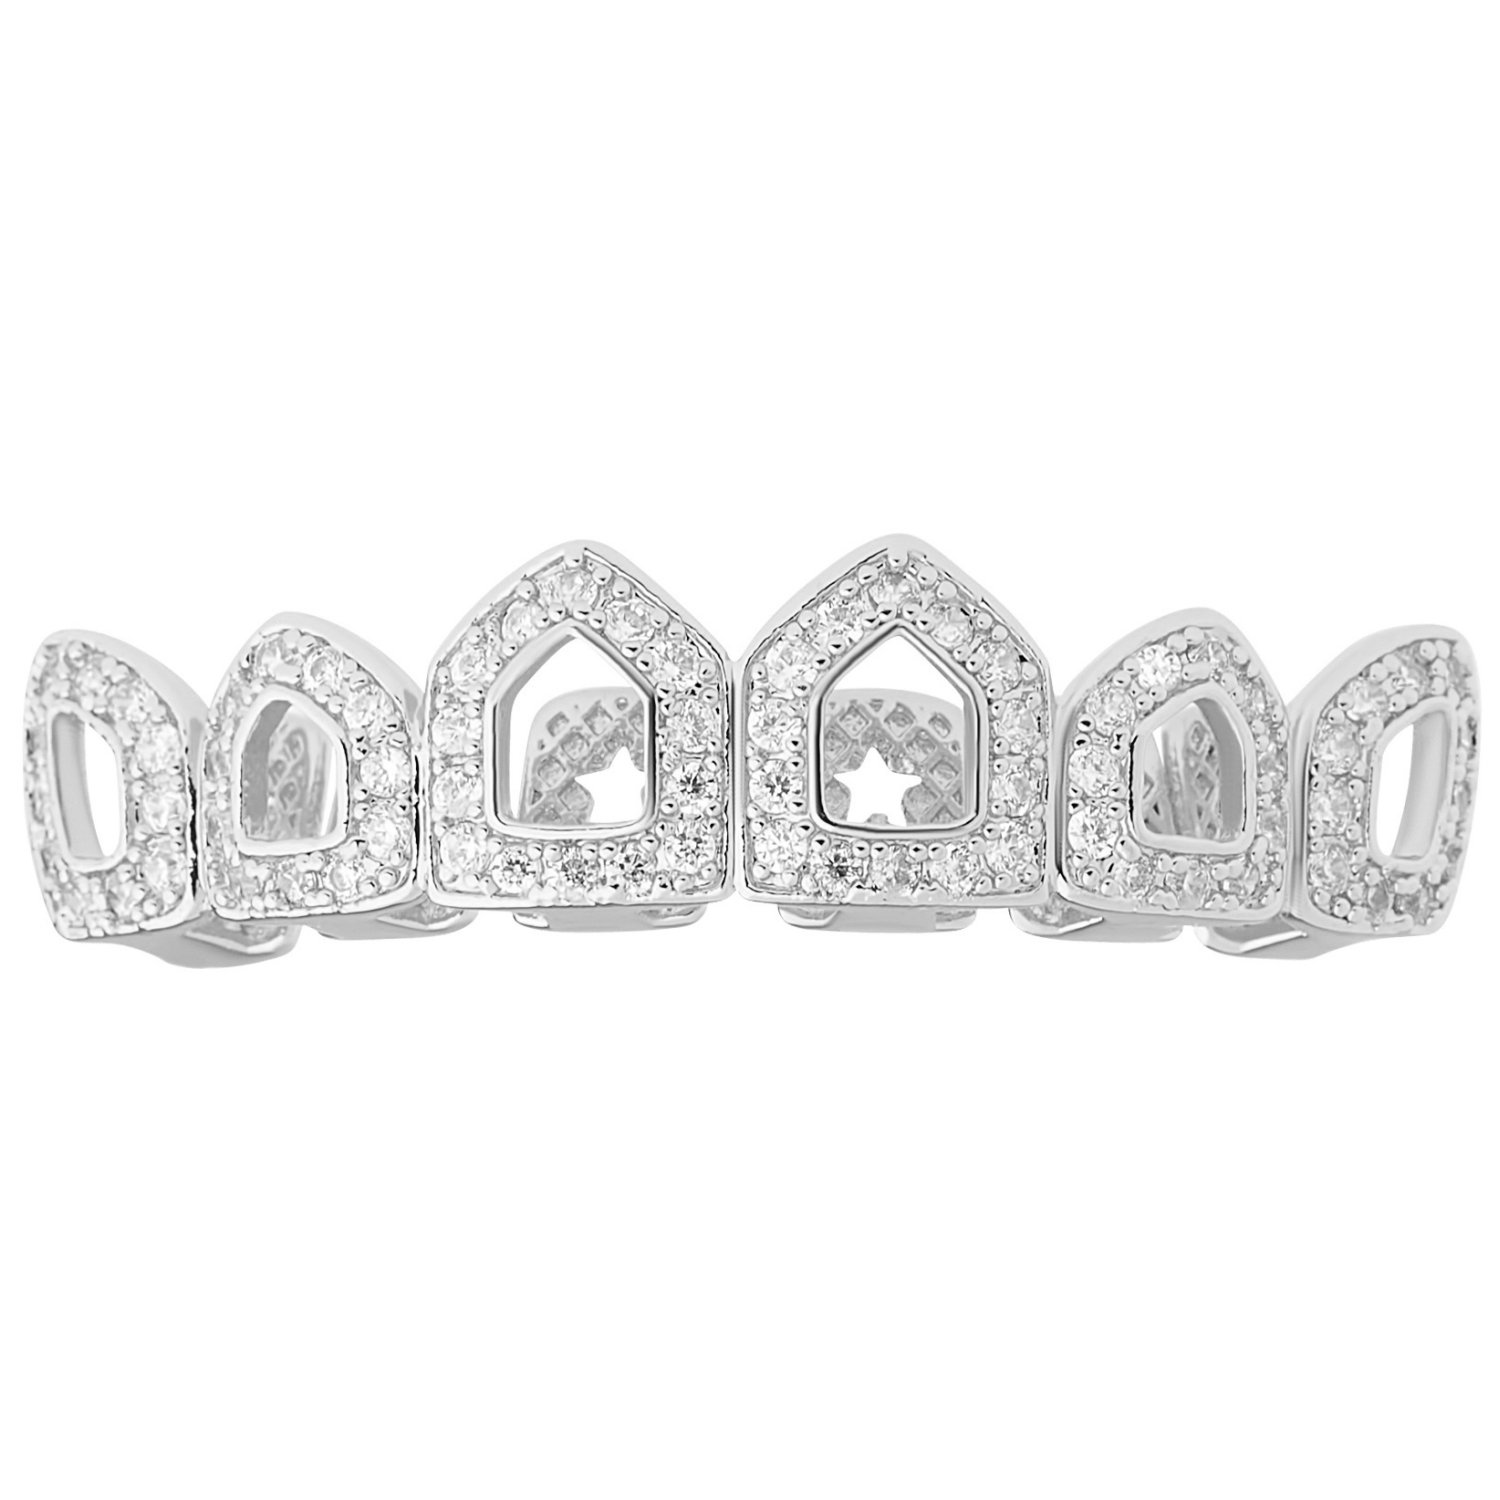 Vampire Zirconia Top Silver Iced Out Grillz One Size fits All